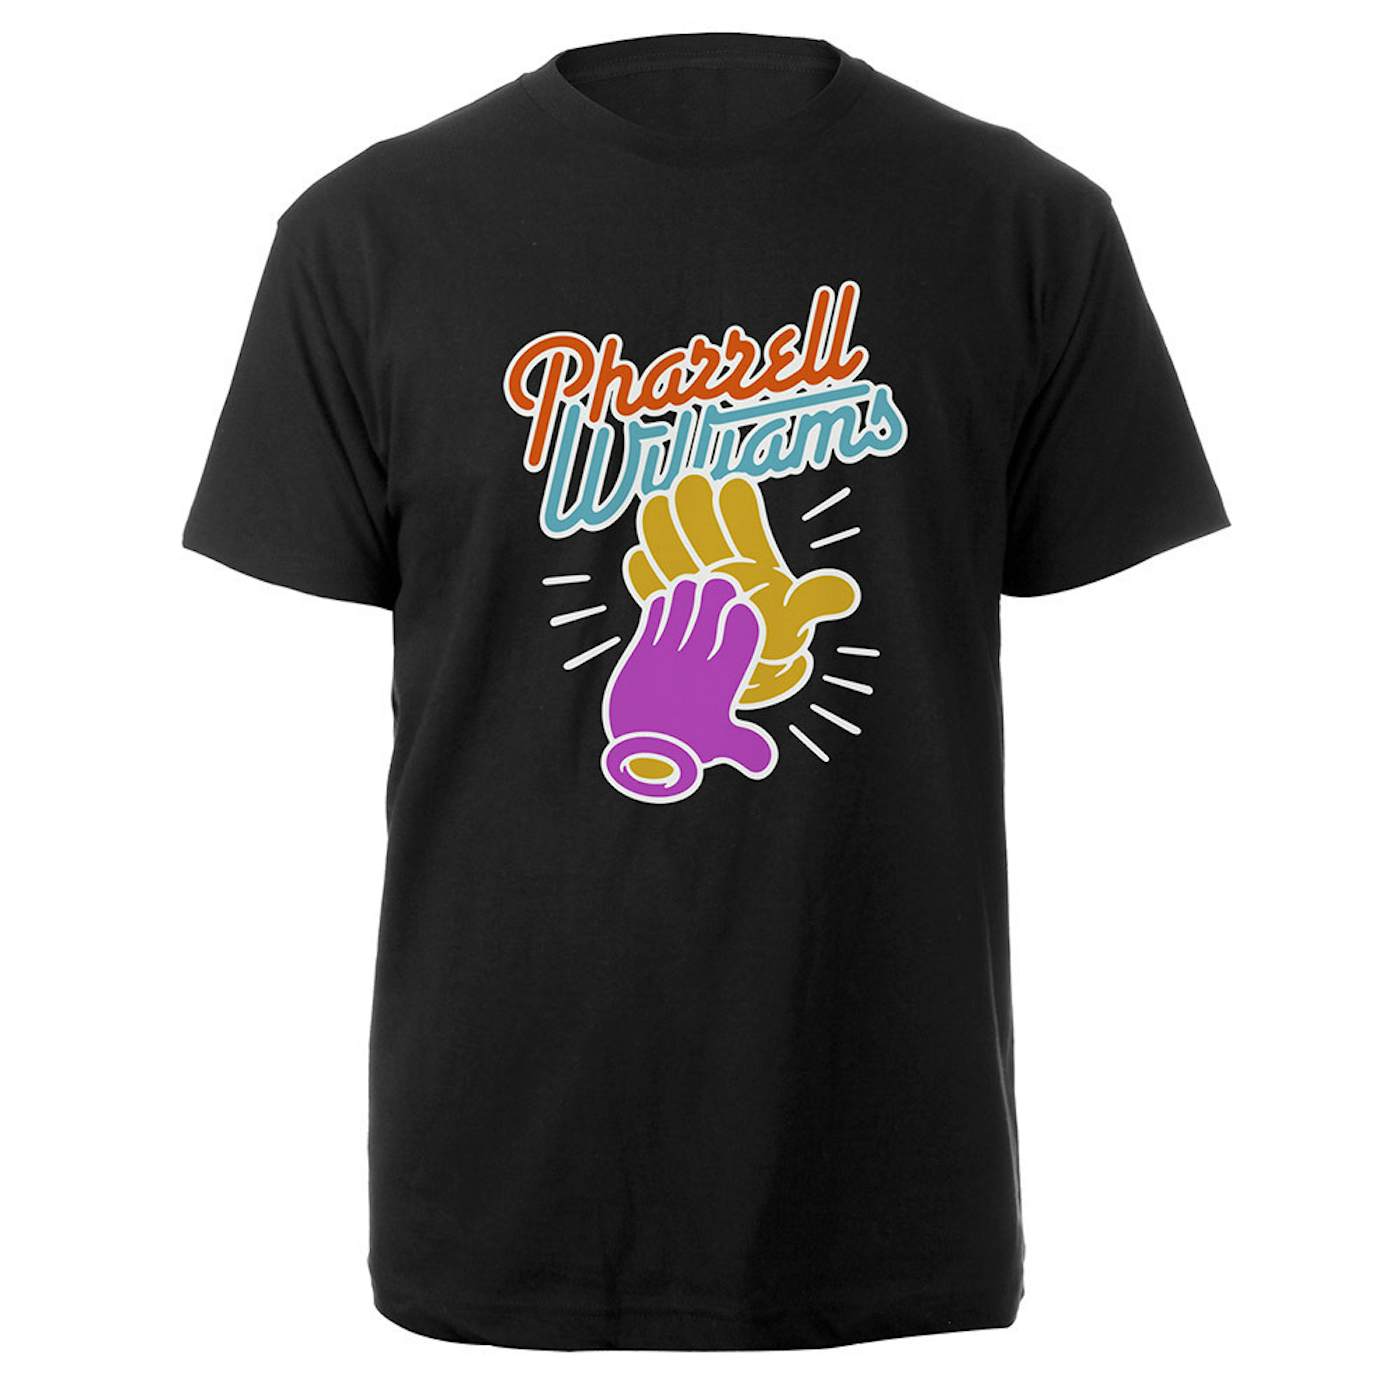 Pharrell Williams Clapping Hands Tee